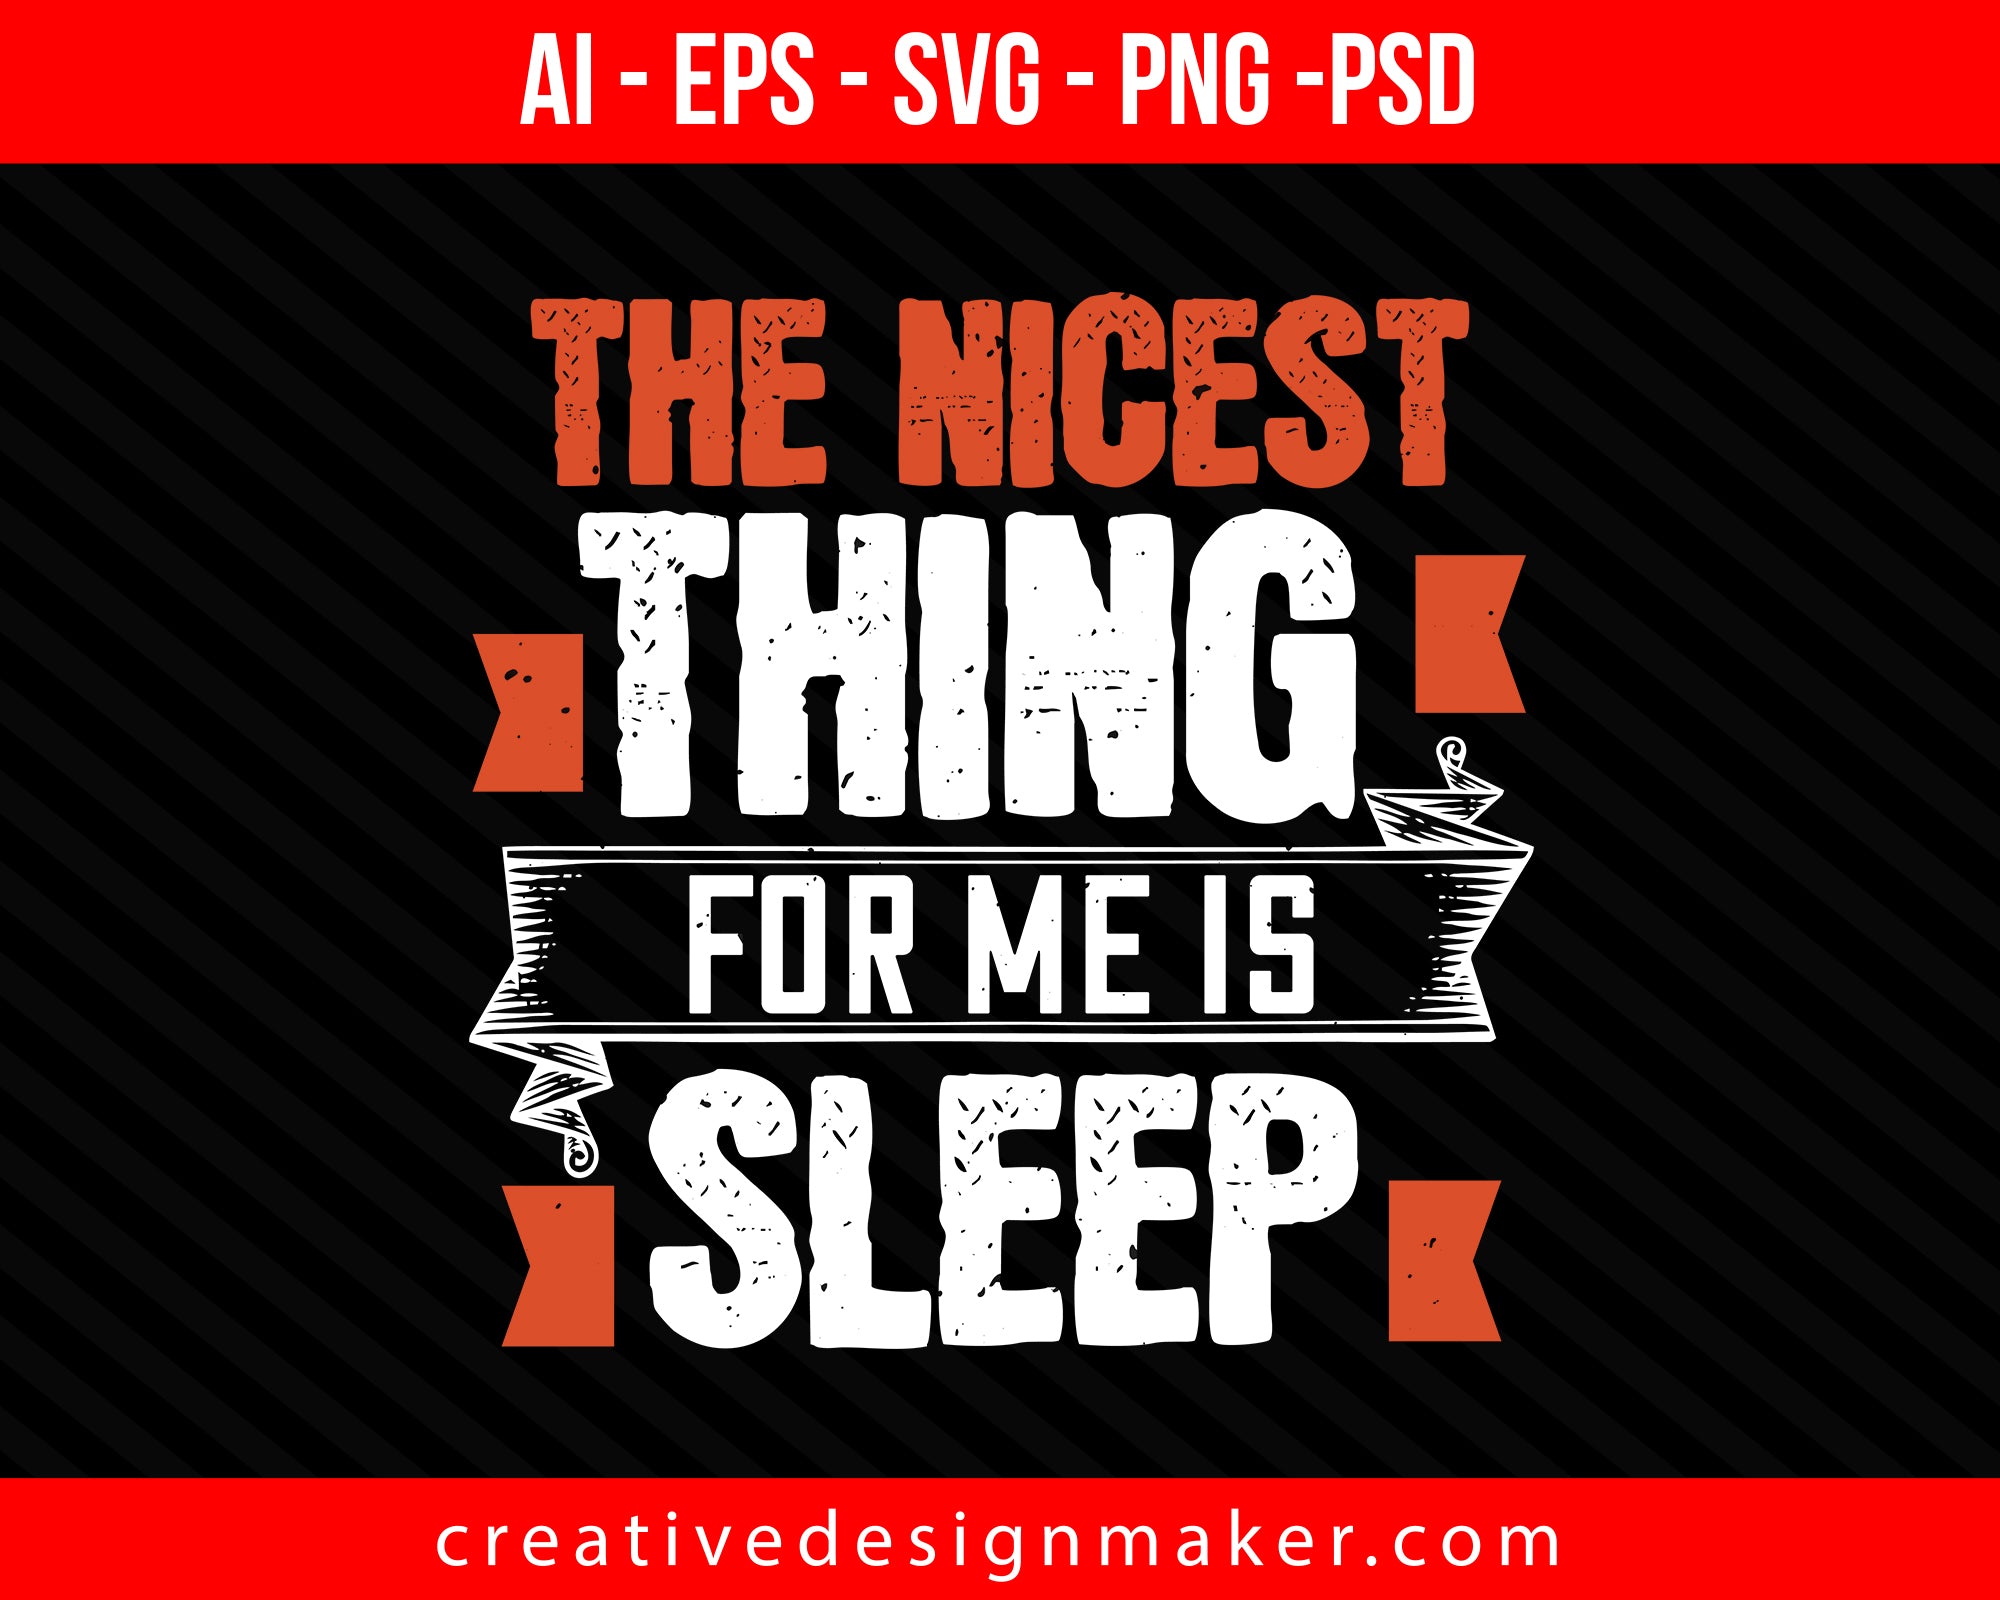 The nicest thing for me is sleep Print Ready Editable T-Shirt SVG Design!